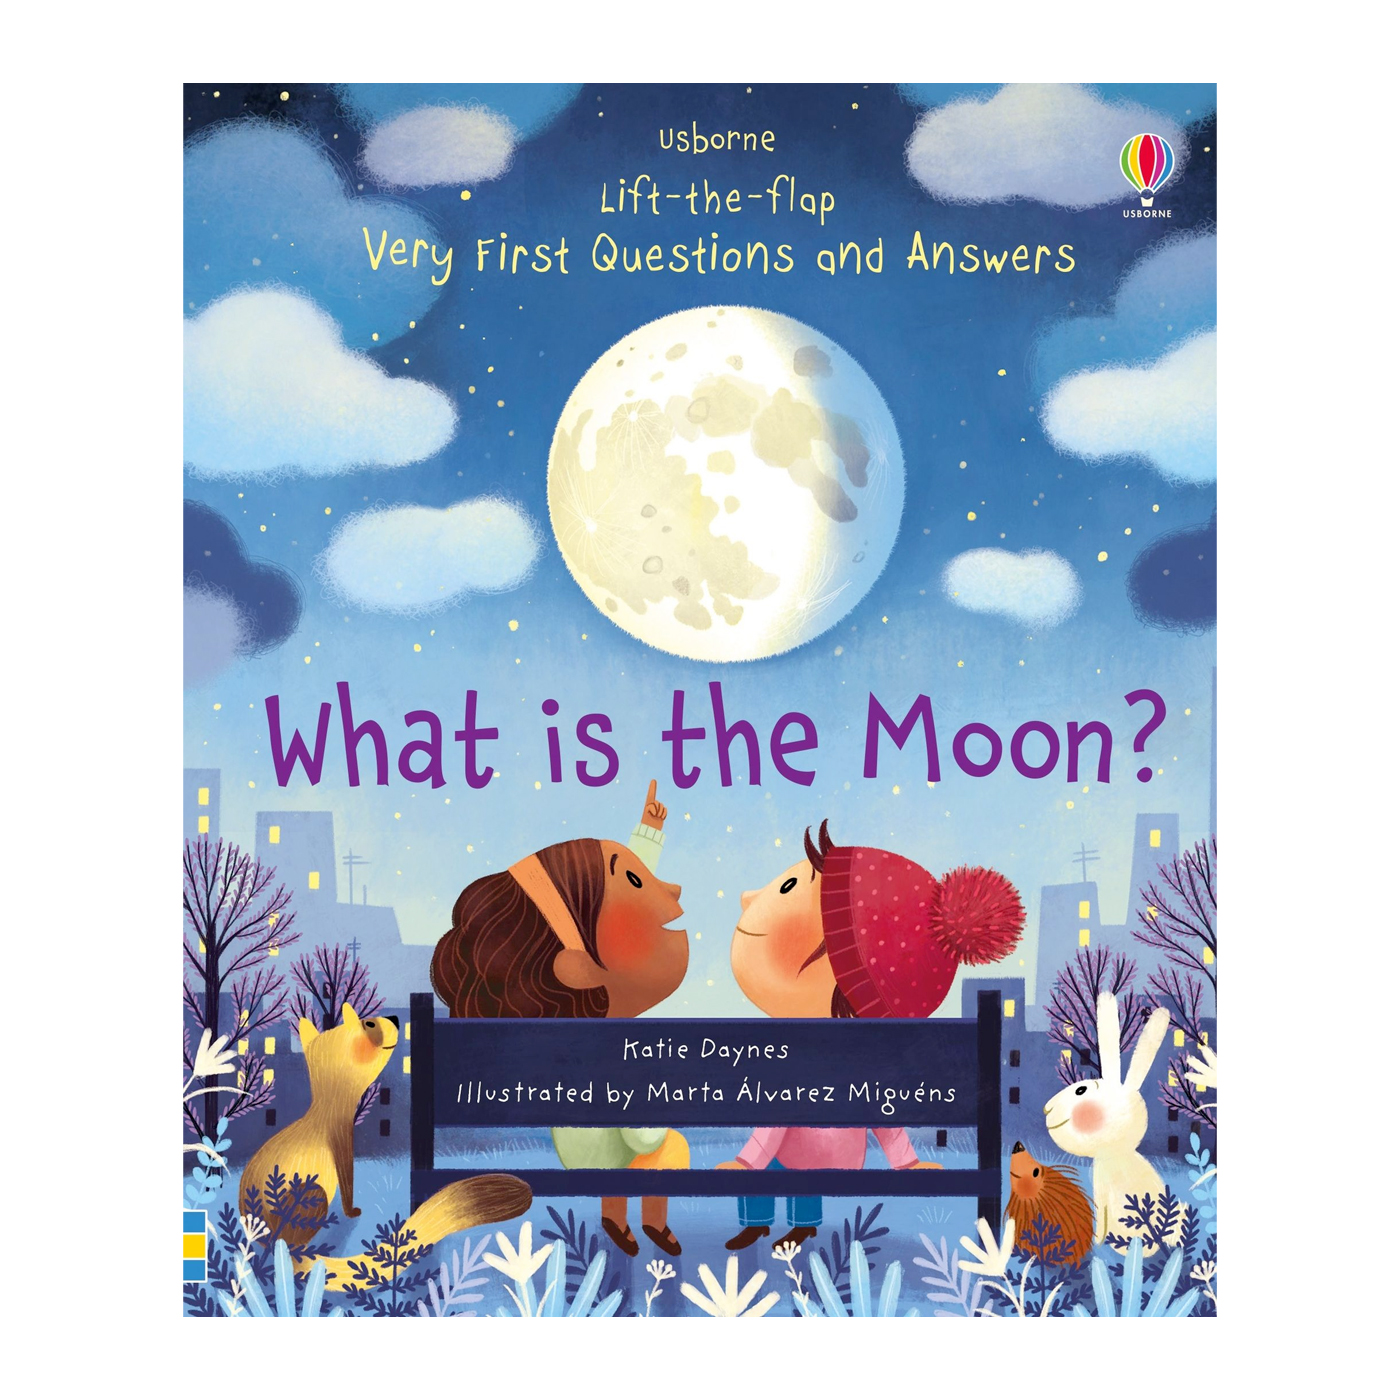  Very First Questions and Answers What is the Moon?